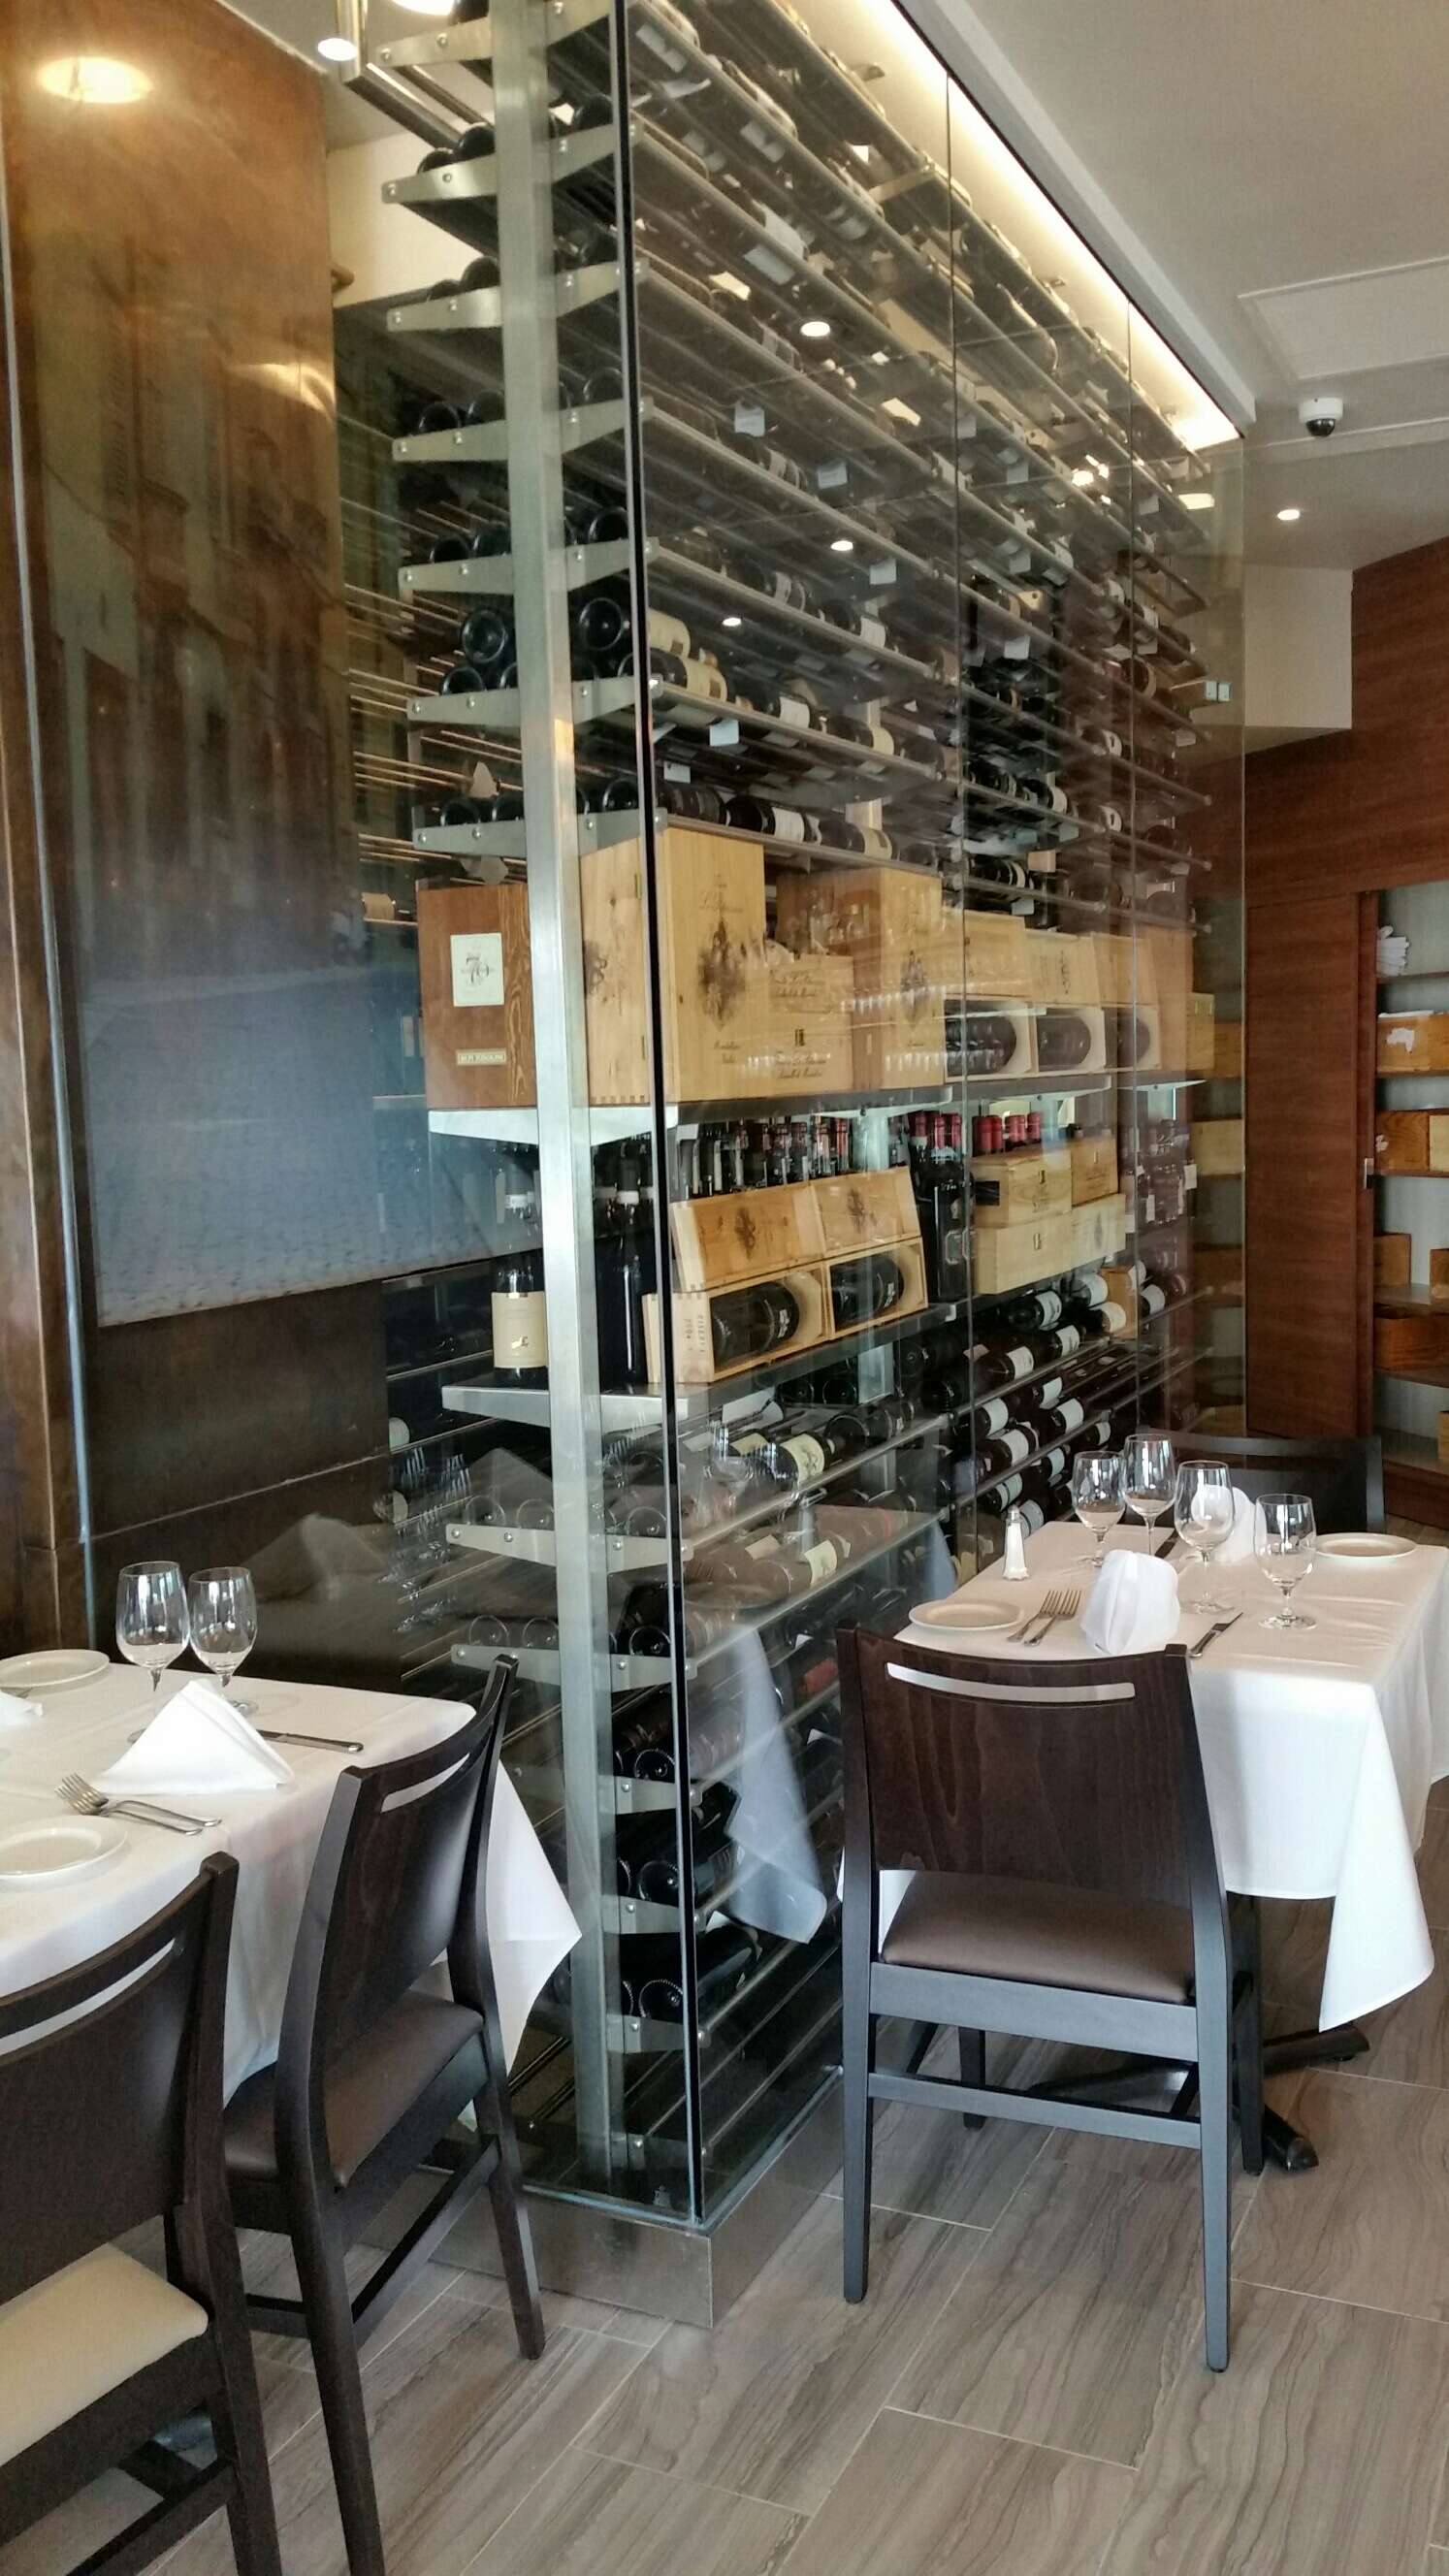 LVG Stainless Steel racking system and ladder system- Fine Family Dining, Italian Cuisine.